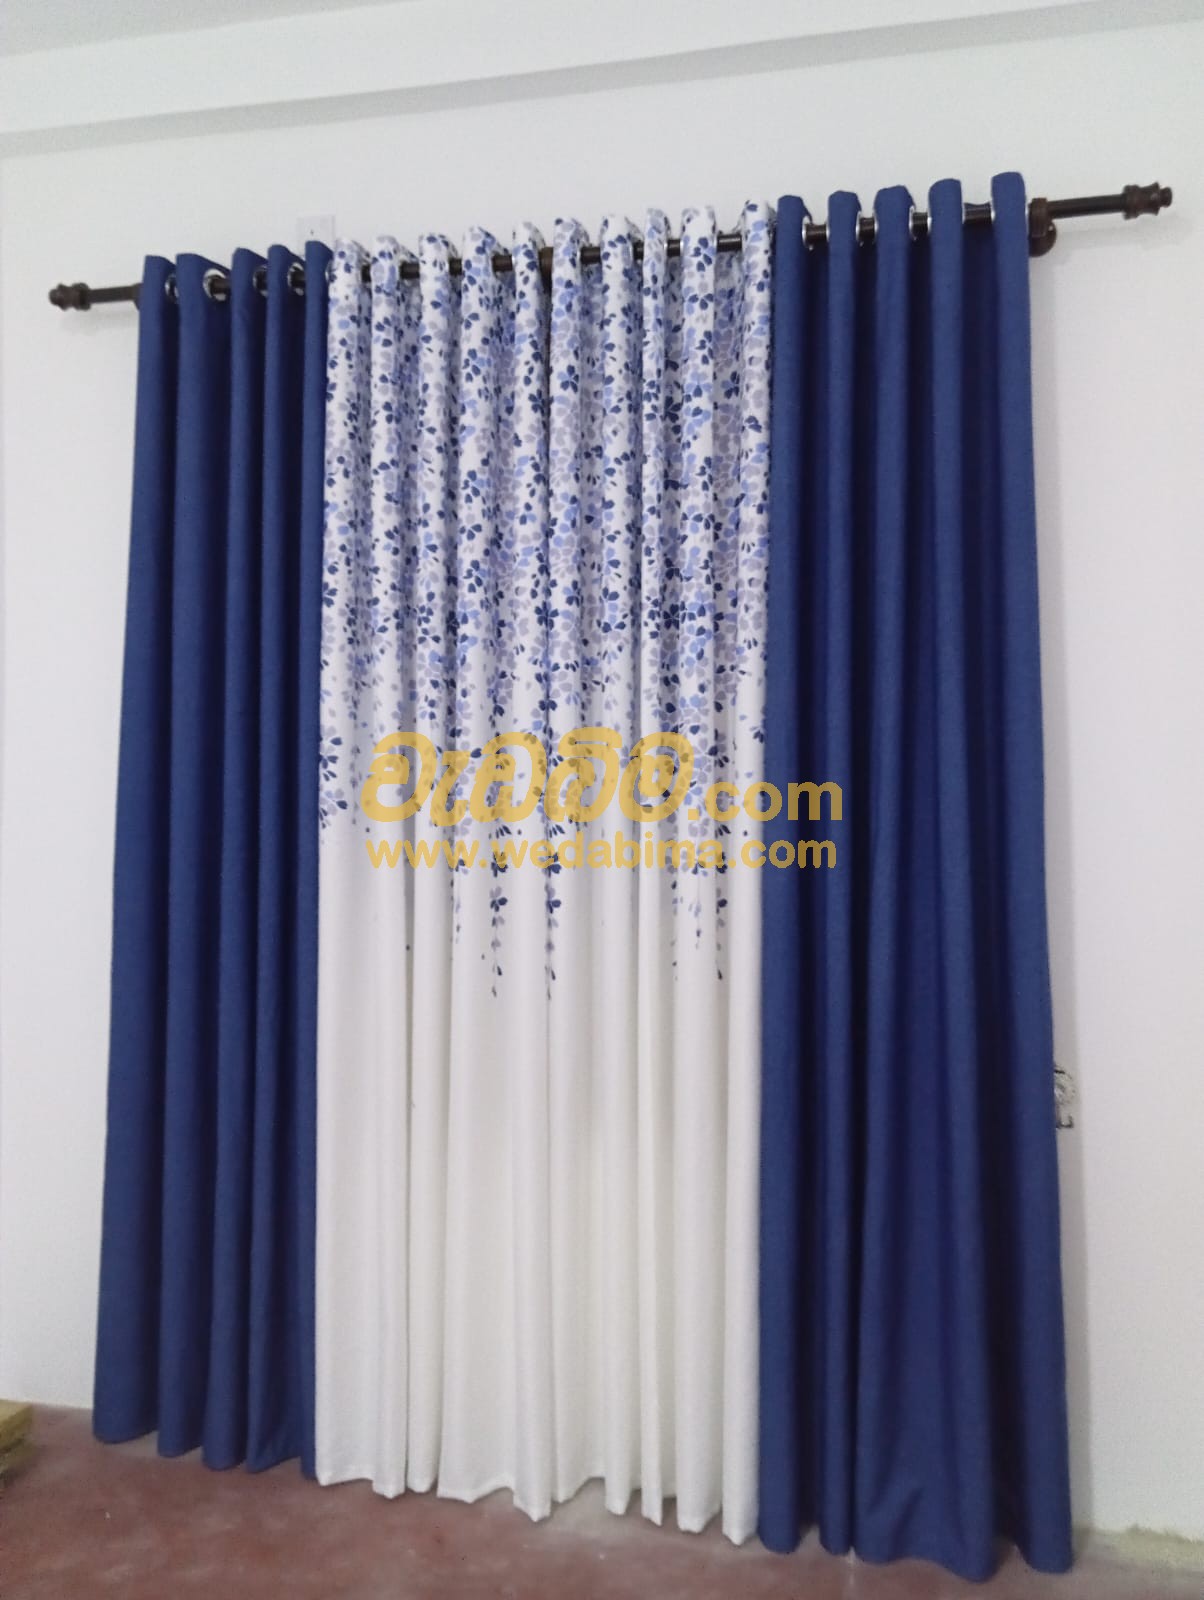 Curtain Suppliers In Colombo